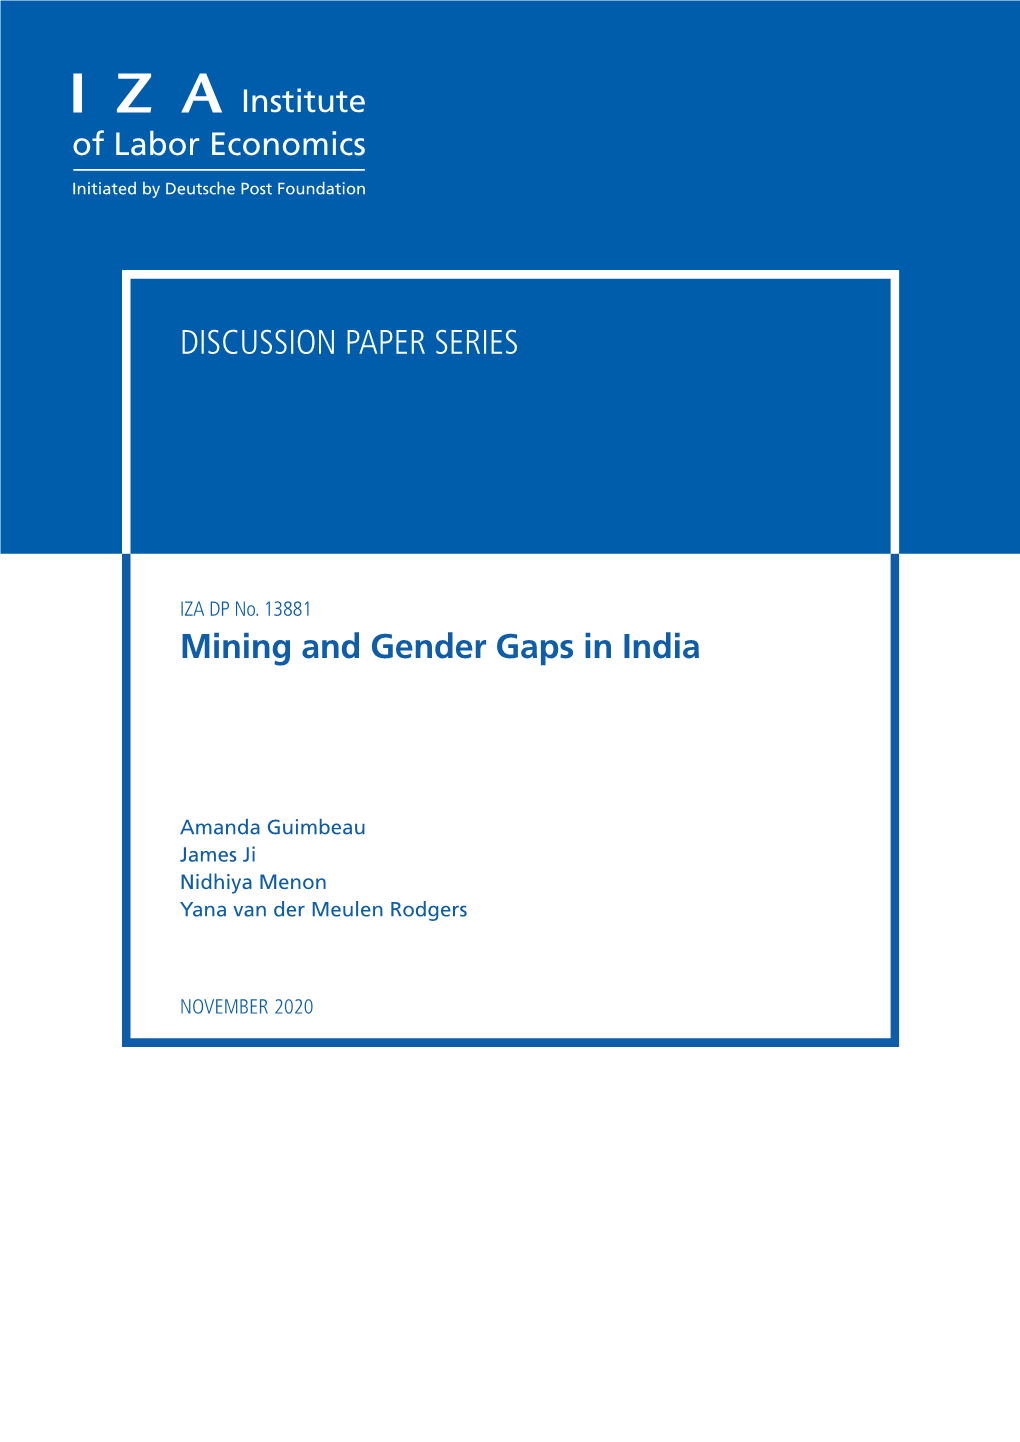 Mining and Gender Gaps in India